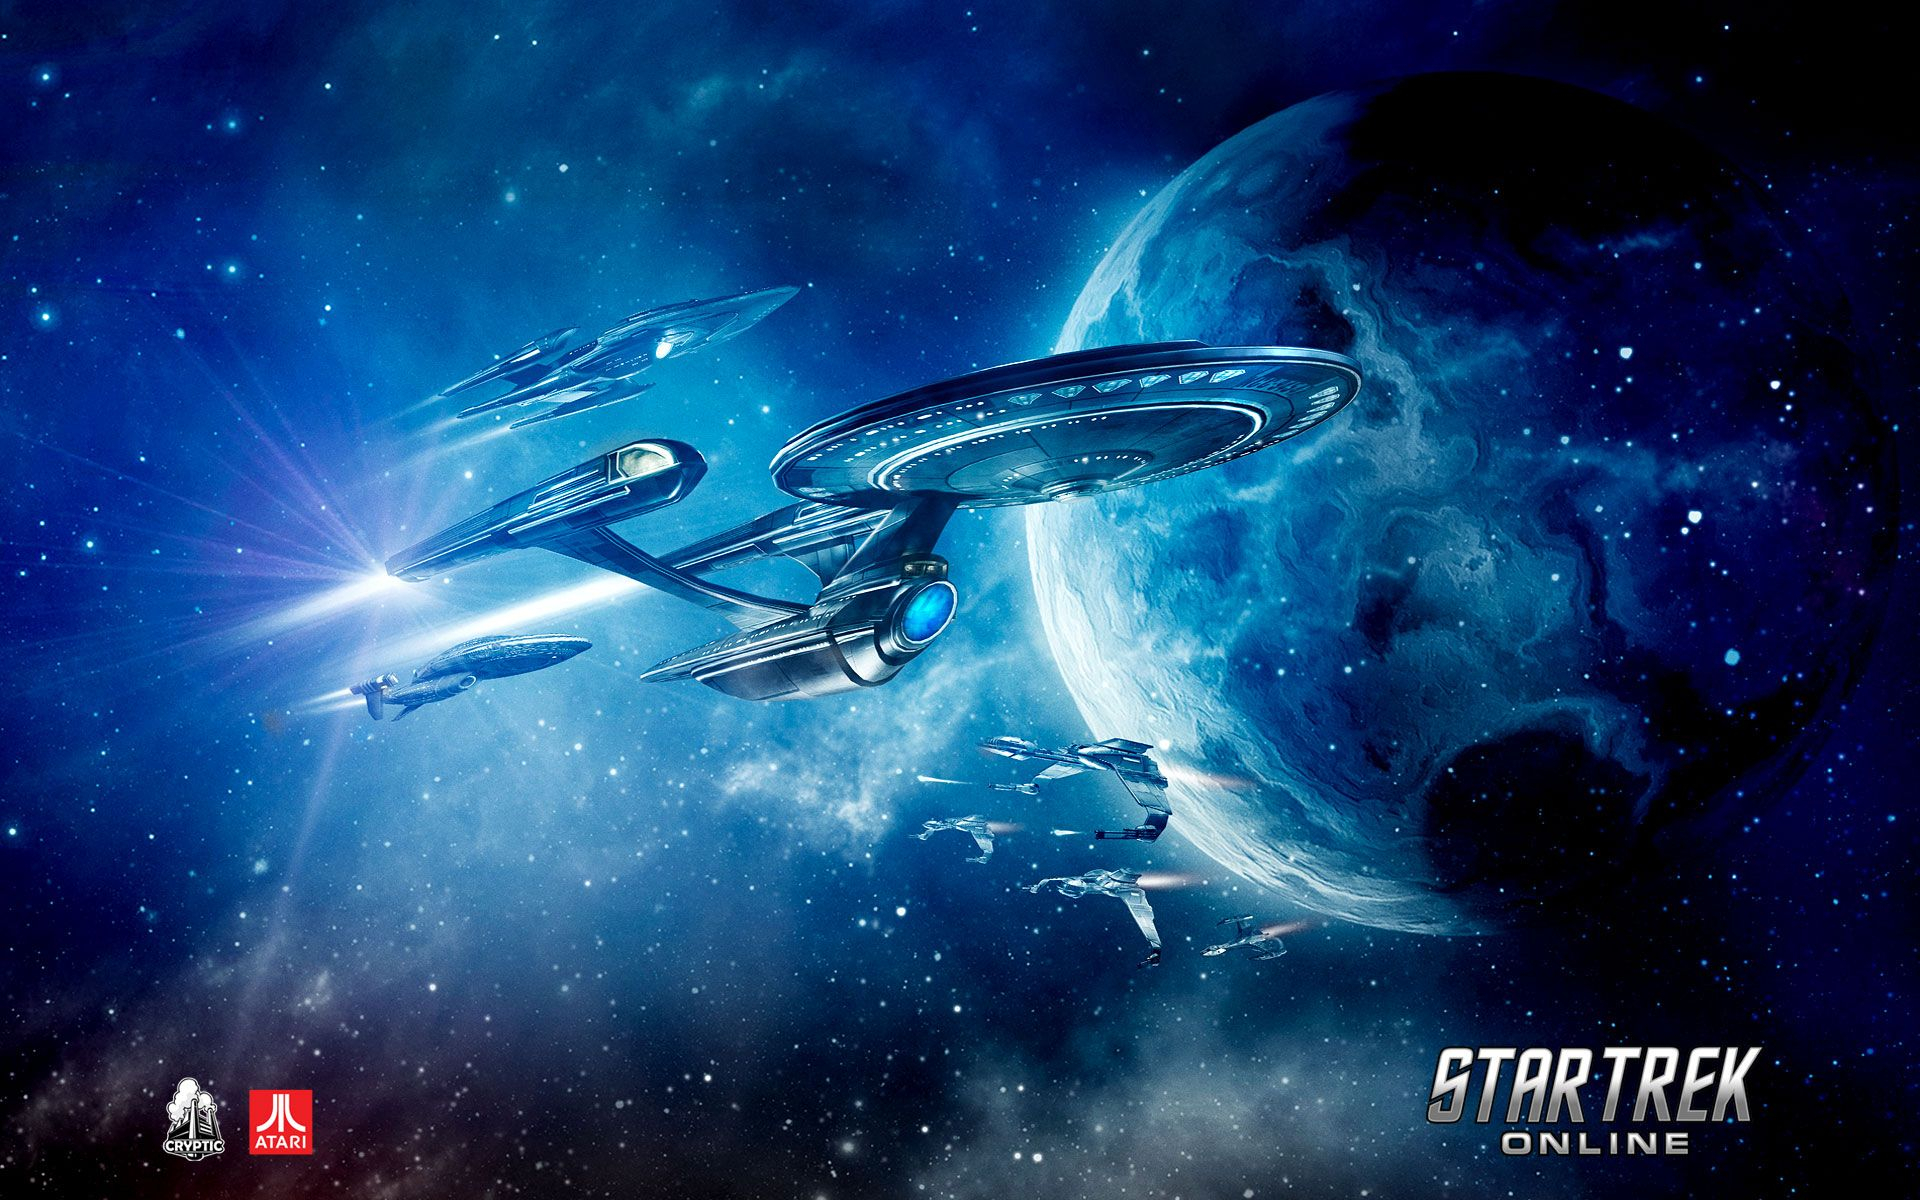 1920x1200 We are rockstars in Wallpaper World! Find and bookmark your favorite wallpapers. | Star trek wallpaper, Star trek online, Star trek art